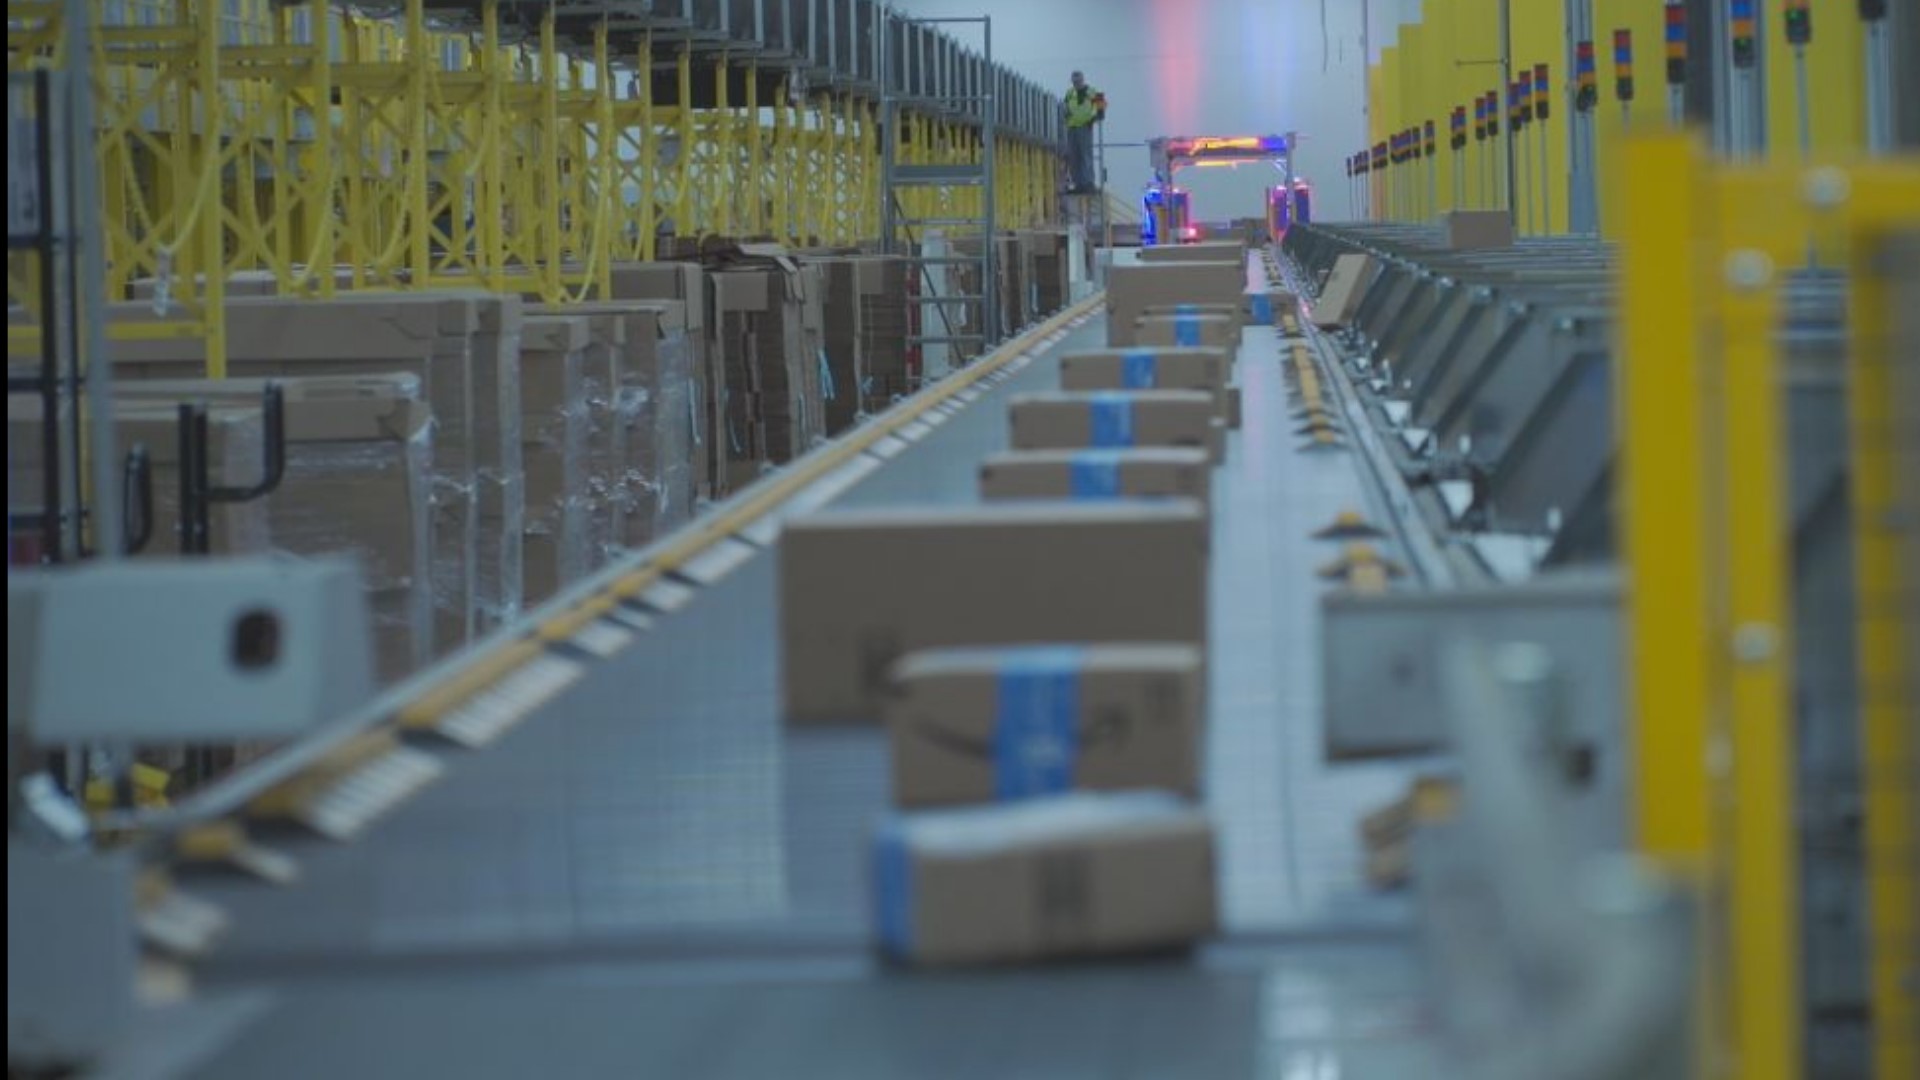 Amazon is gearing up for its annual members only sale. The company invited us inside to see how orders are sorted and packed.